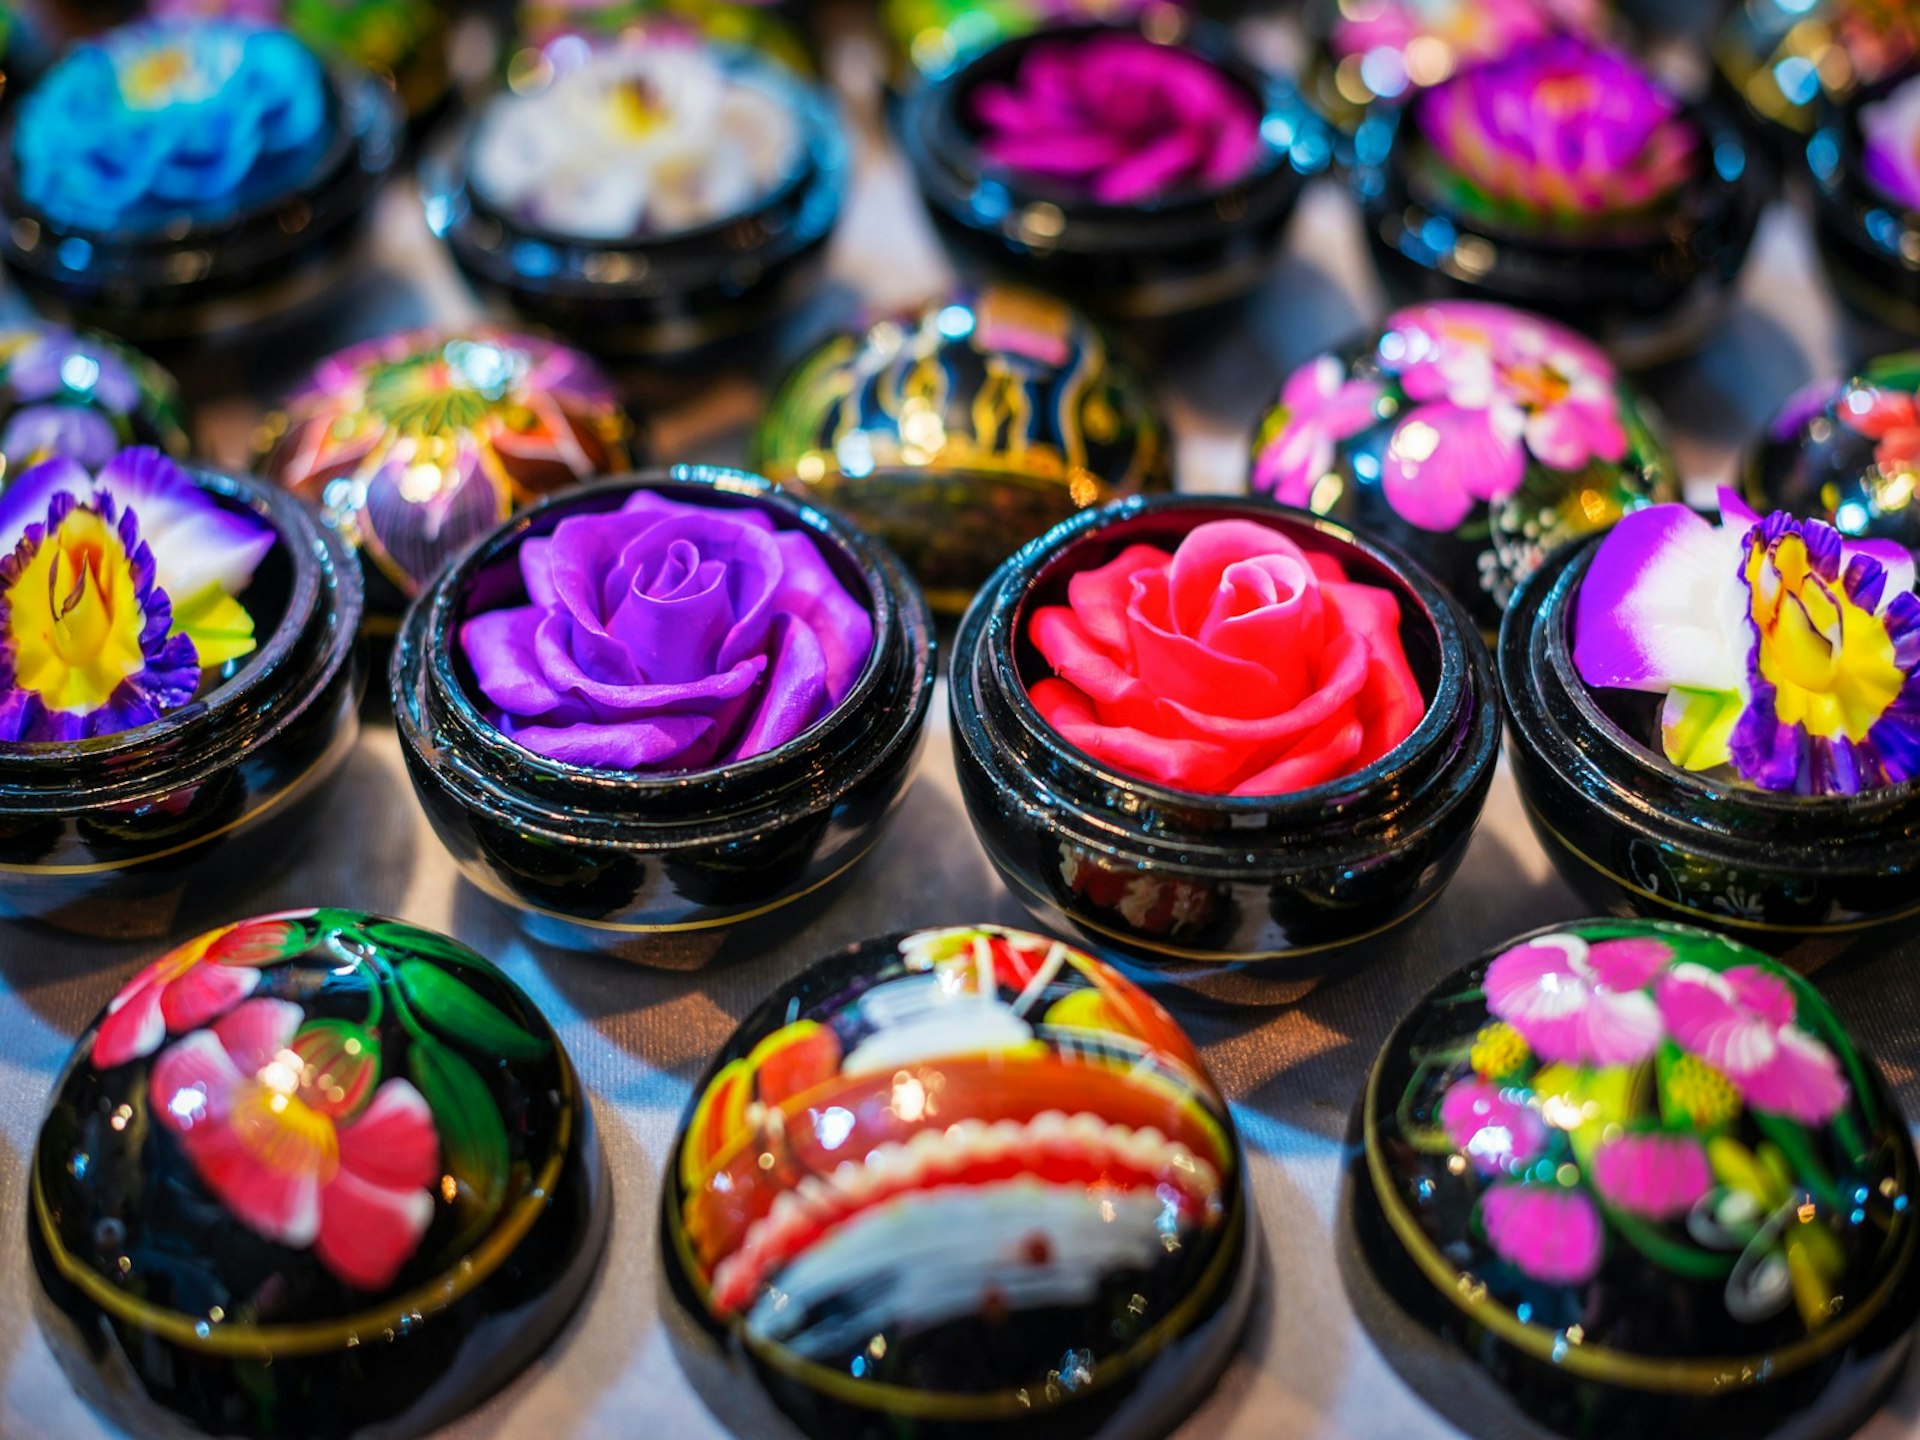 Colourful soap carvings on display in Chiang Mai markets © aphotostory / Getty Images